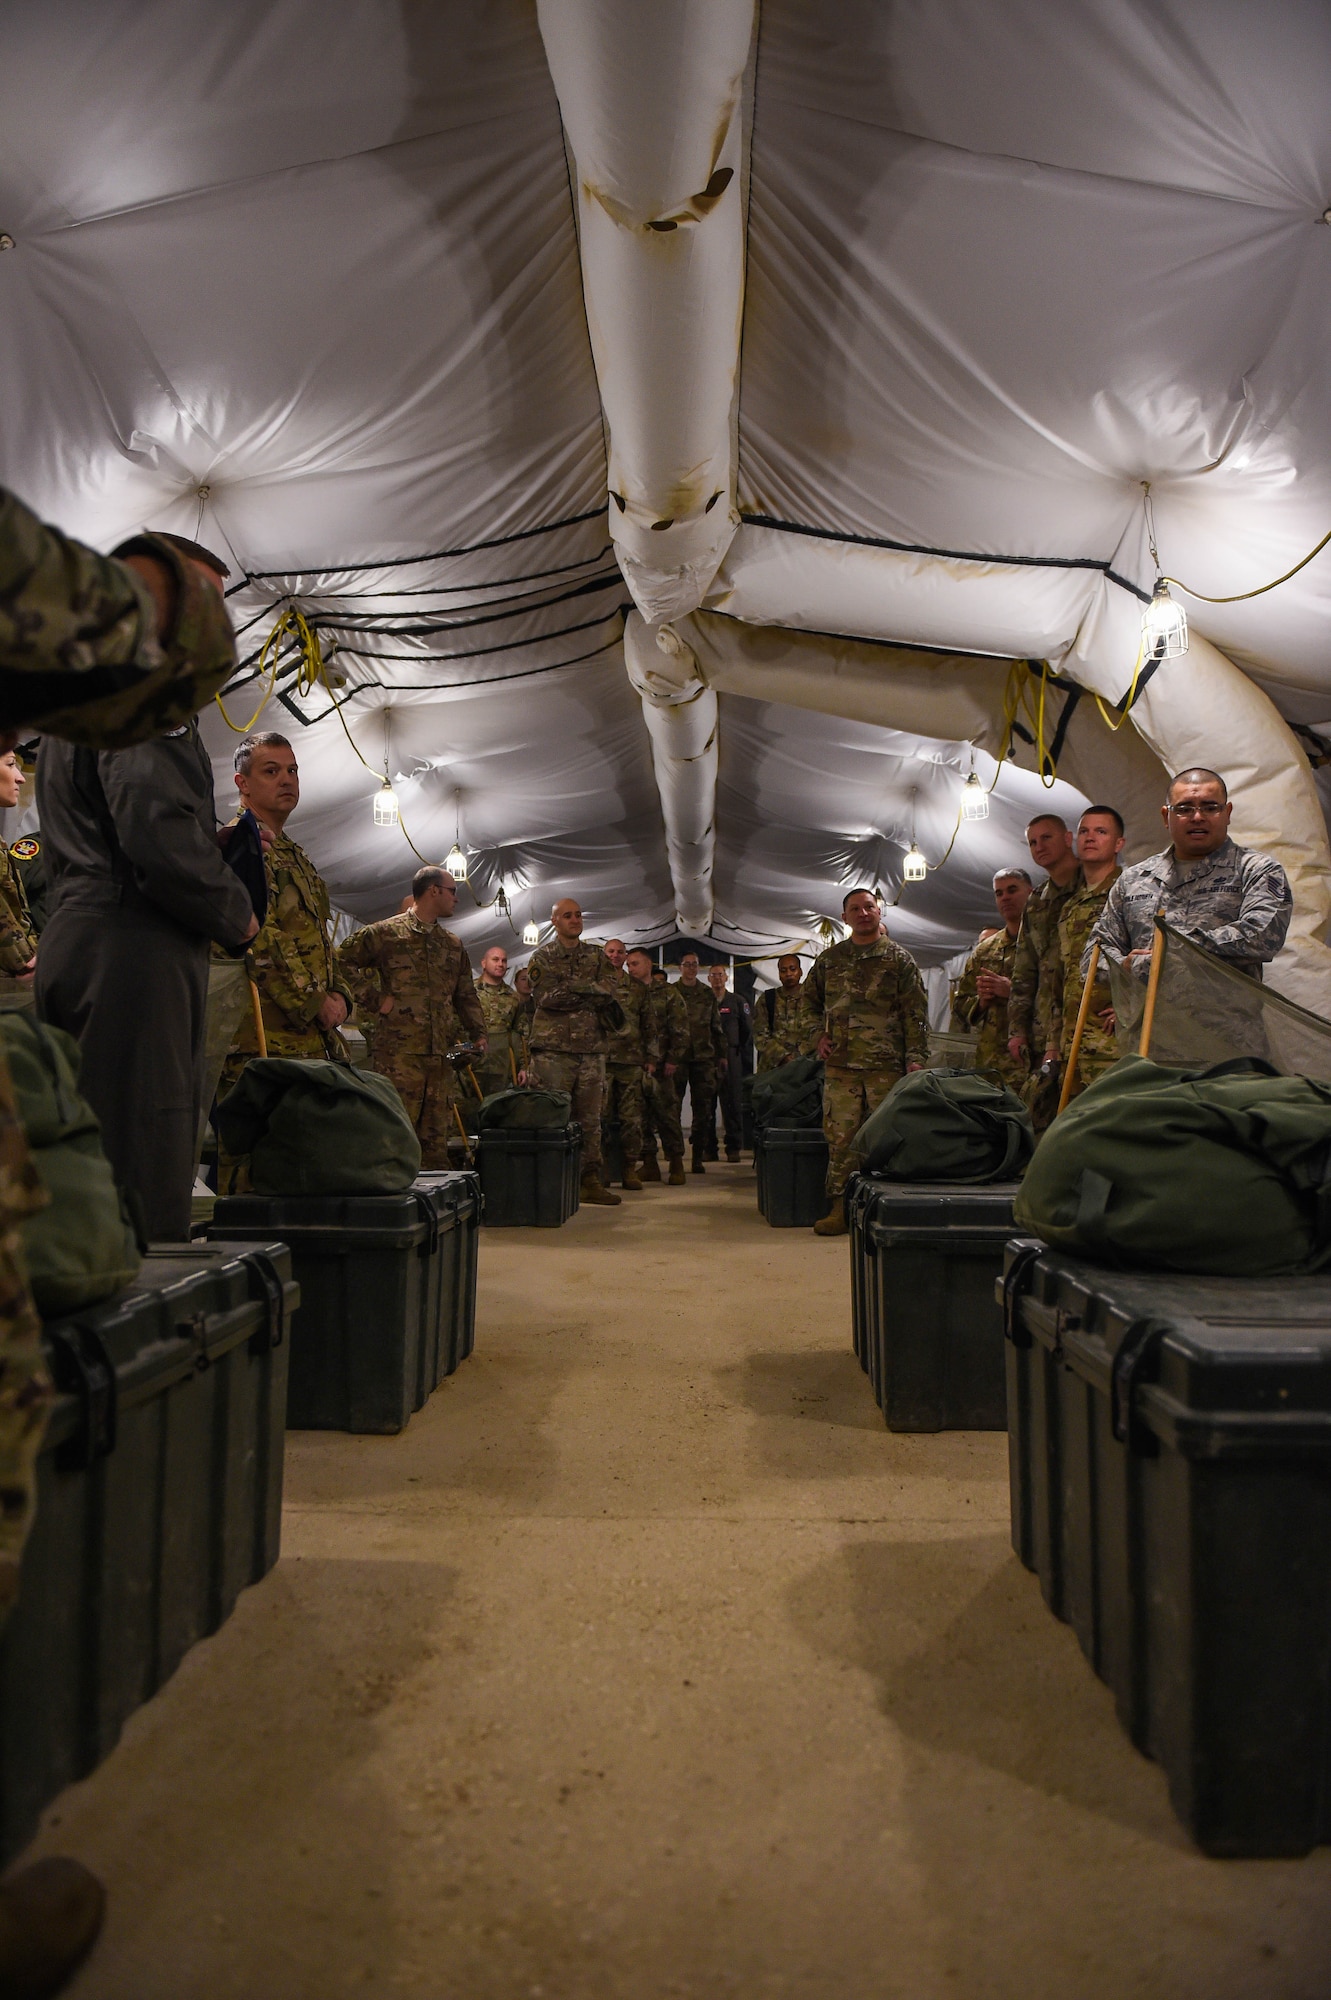 Leadership members from the 62nd Airlift Wing, Joint Base Lewis-McChord, Wash., look around a tent at the 319th Training Squadron, basic expeditionary Airman skills training (BEAST) headquarters, Lackland Air Force Base, Texas, Oct. 17, 2019. U.S. Air Force basic trainees spend one out of the eight weeks of basic military training (BMT) at BEAST, where they fulfill about 80 percent of their BMT graduation requirements.